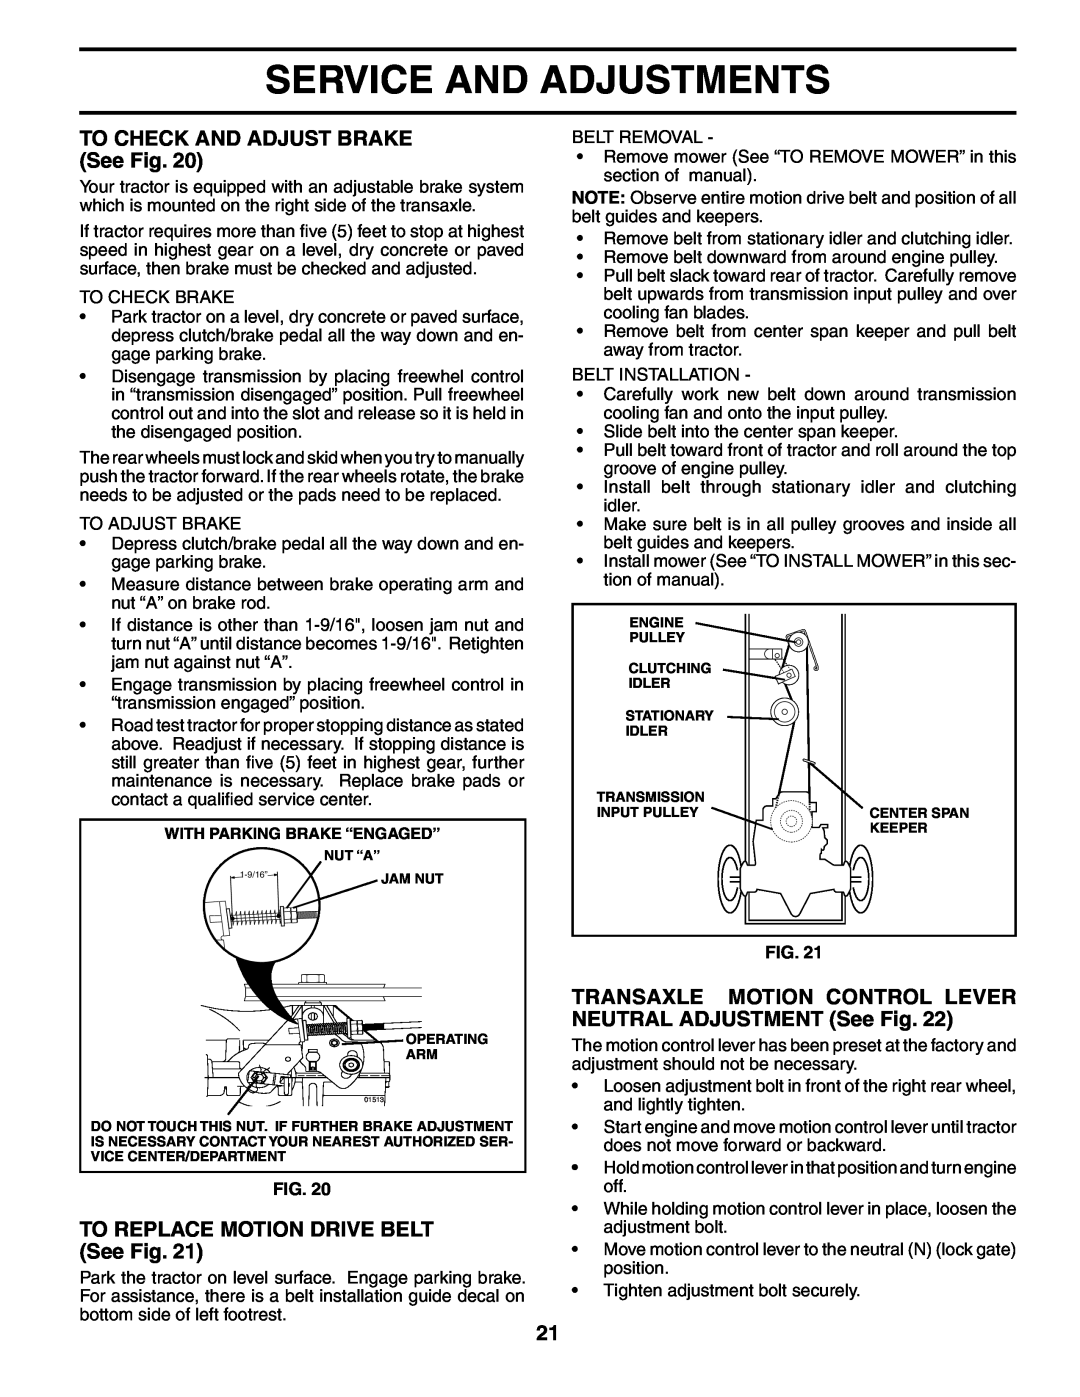 Poulan 191984 manual TO CHECK AND ADJUST BRAKE See Fig, TO REPLACE MOTION DRIVE BELT See Fig, Service And Adjustments 